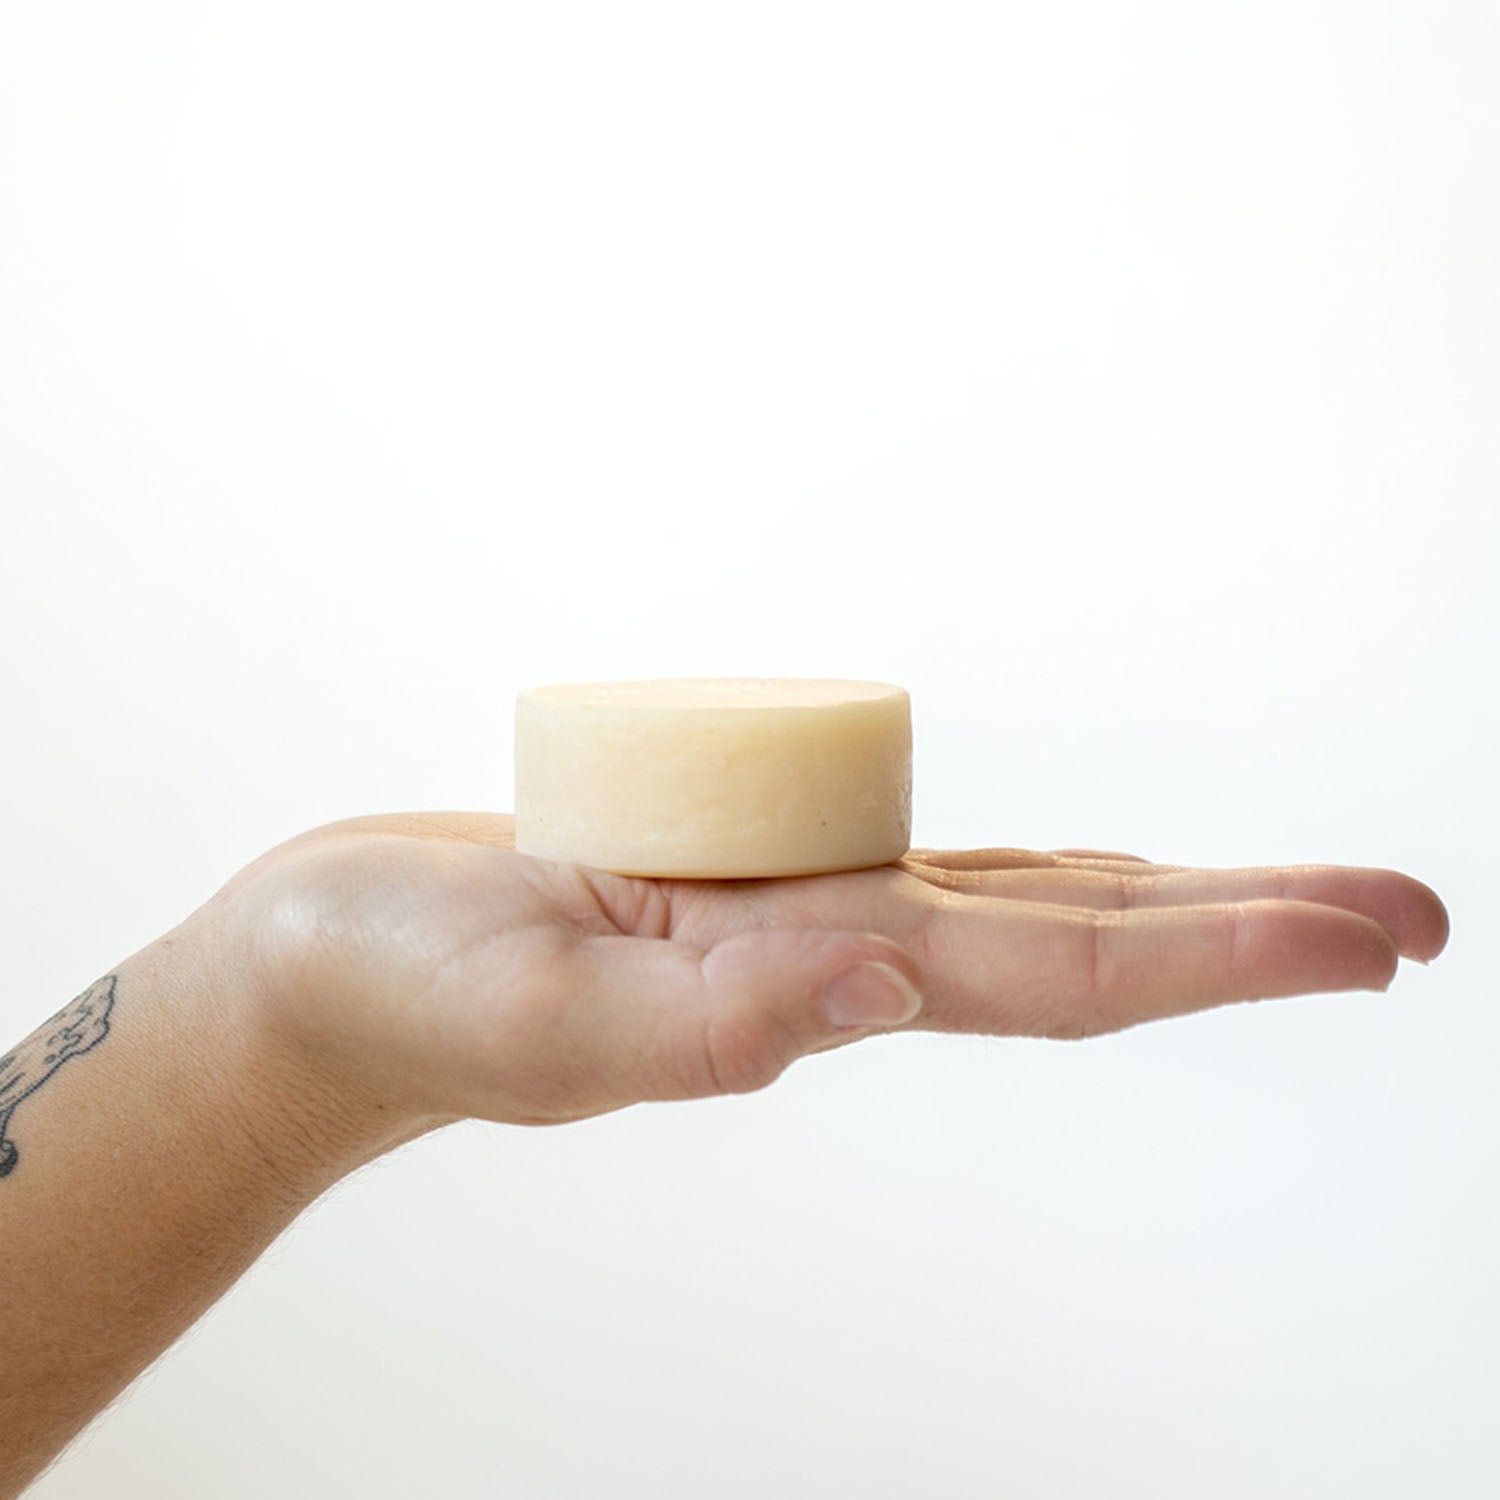 Shave Soap Bar in the palm of an outstretched hand